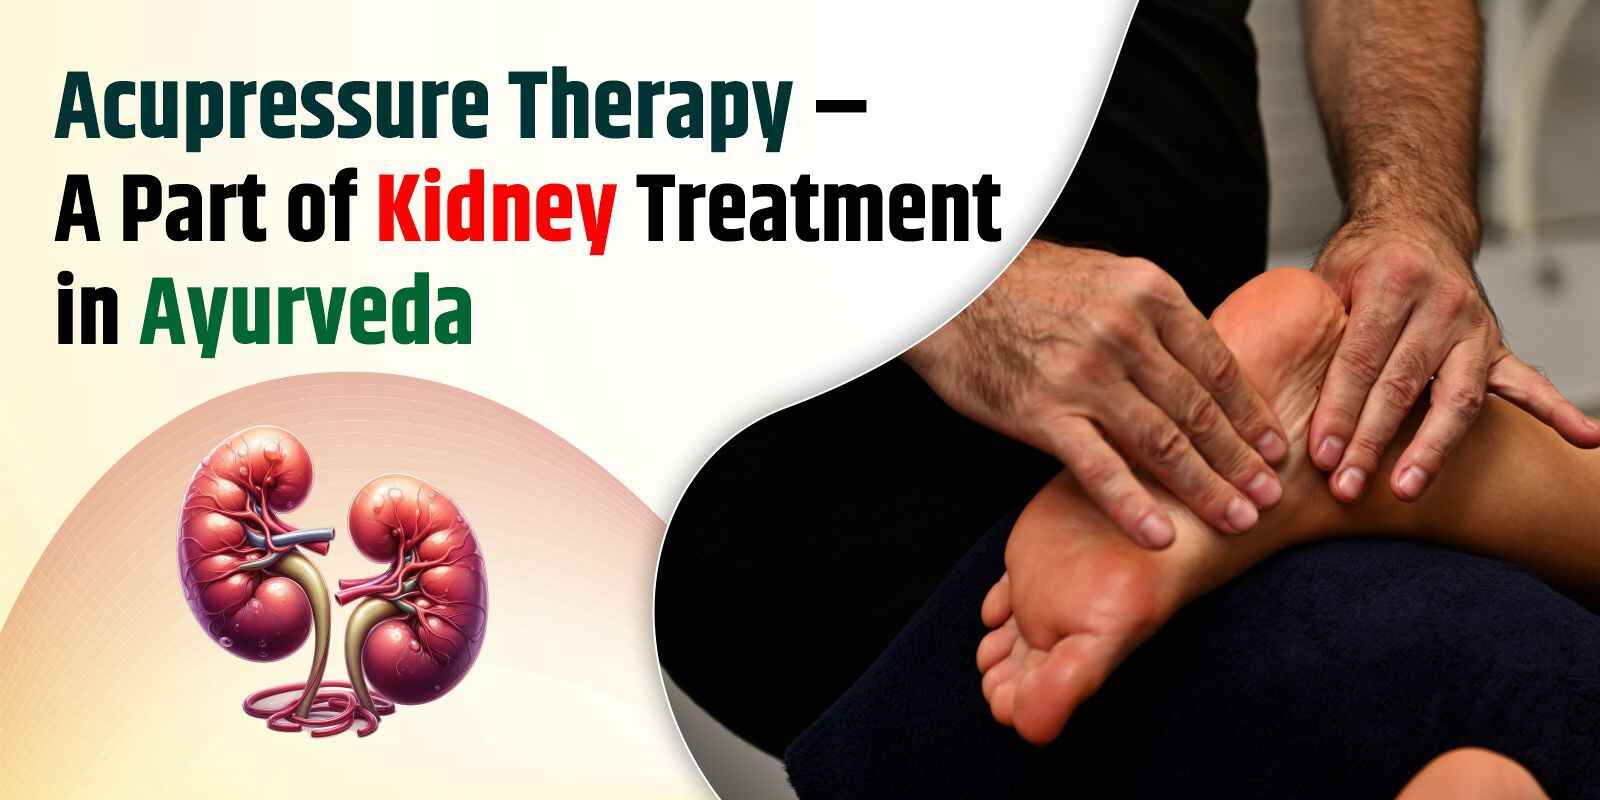 Acupressure Therapy – A Part of Kidney Treatment in Ayurveda